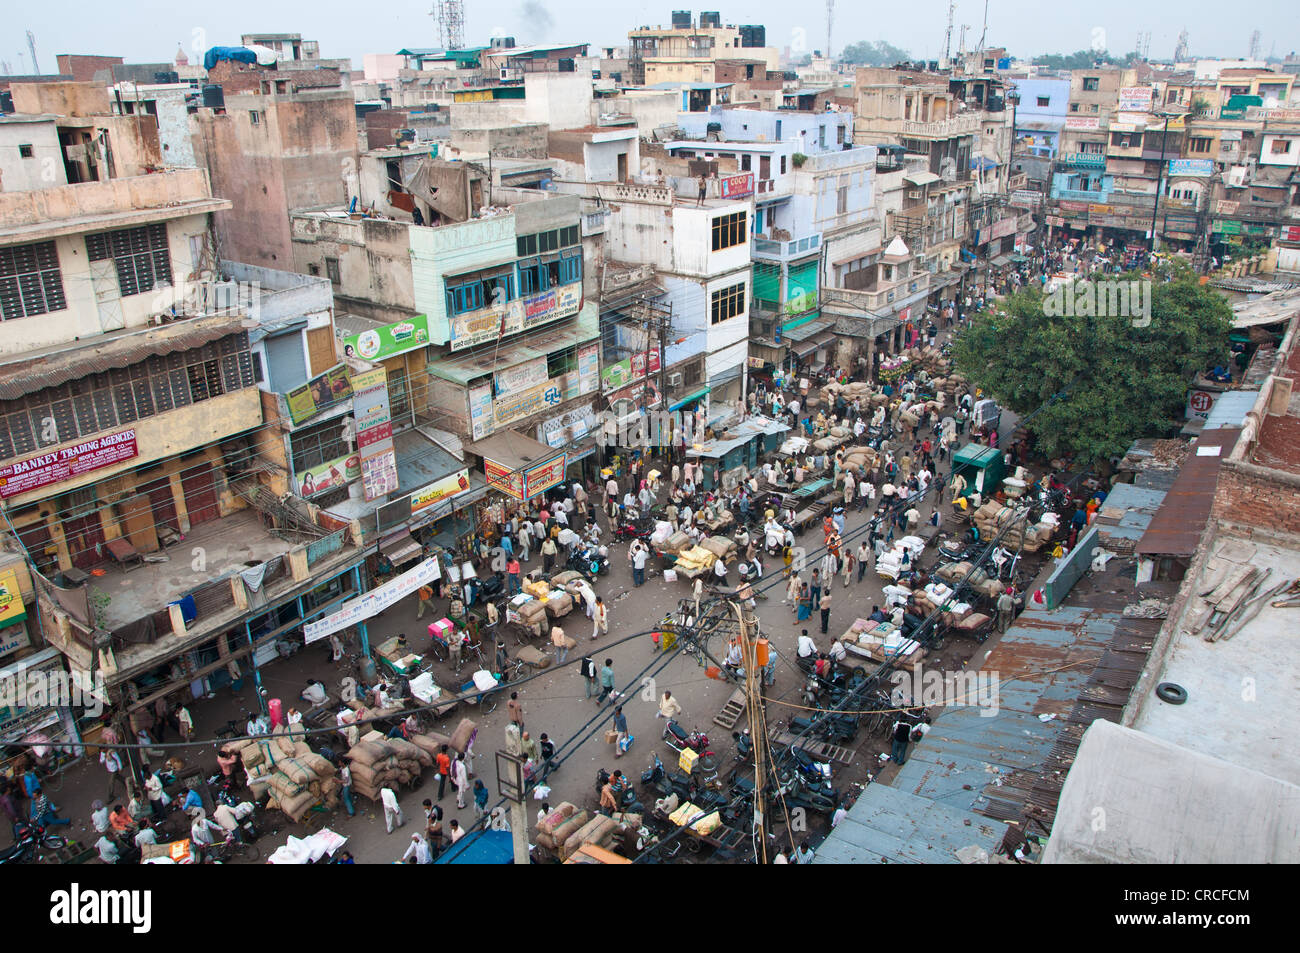 The crowded main street of Old Delhi, now termed Chandni Chowk, that runs from the Red Fort to Fatehpuri Masjid. Stock Photo